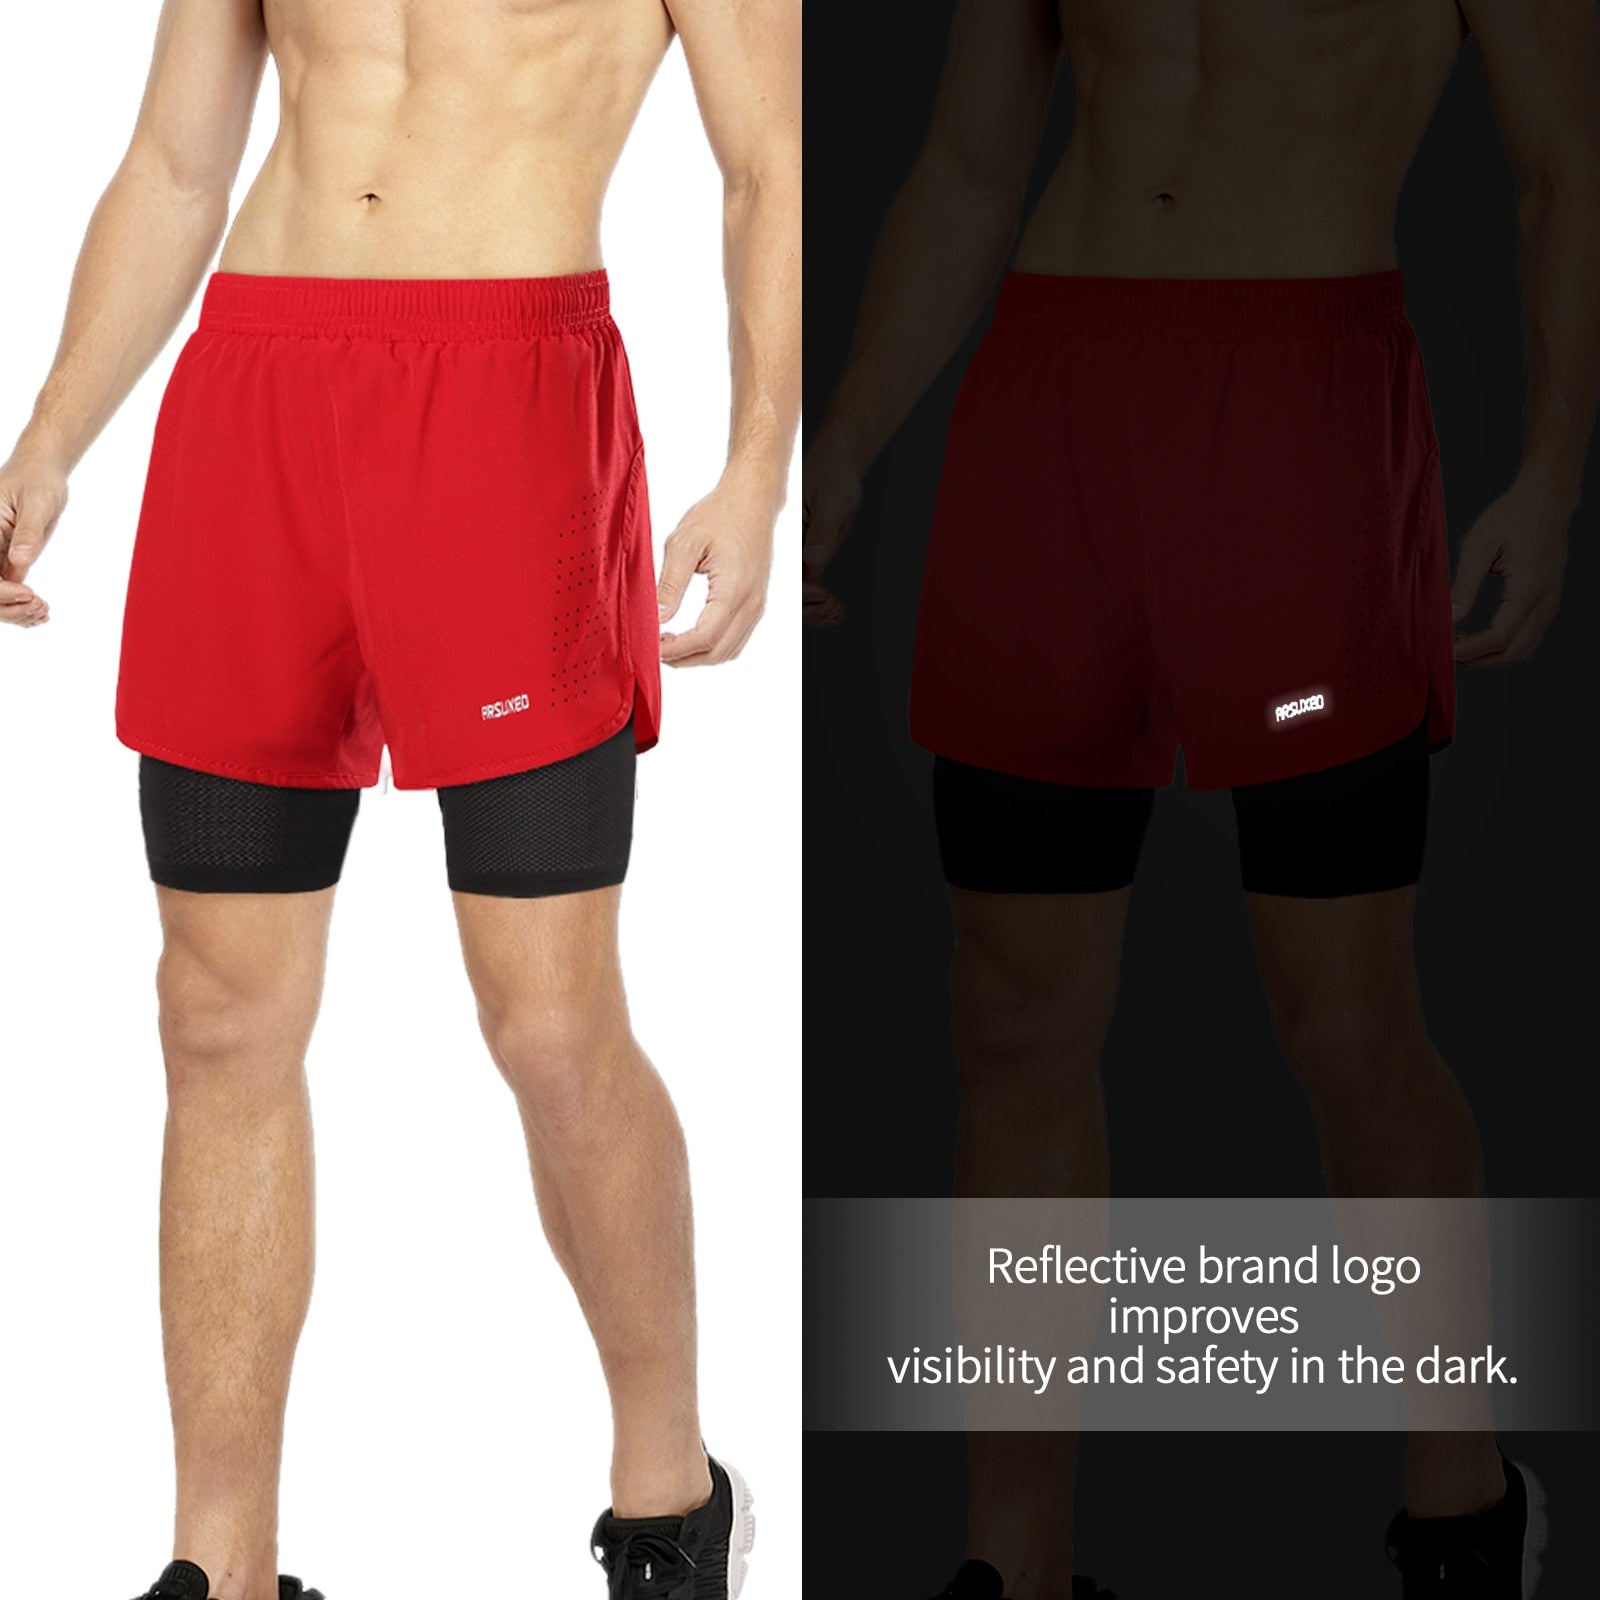 ARSUXEO  2 in 1 Men’s Running Shorts Quick Dry